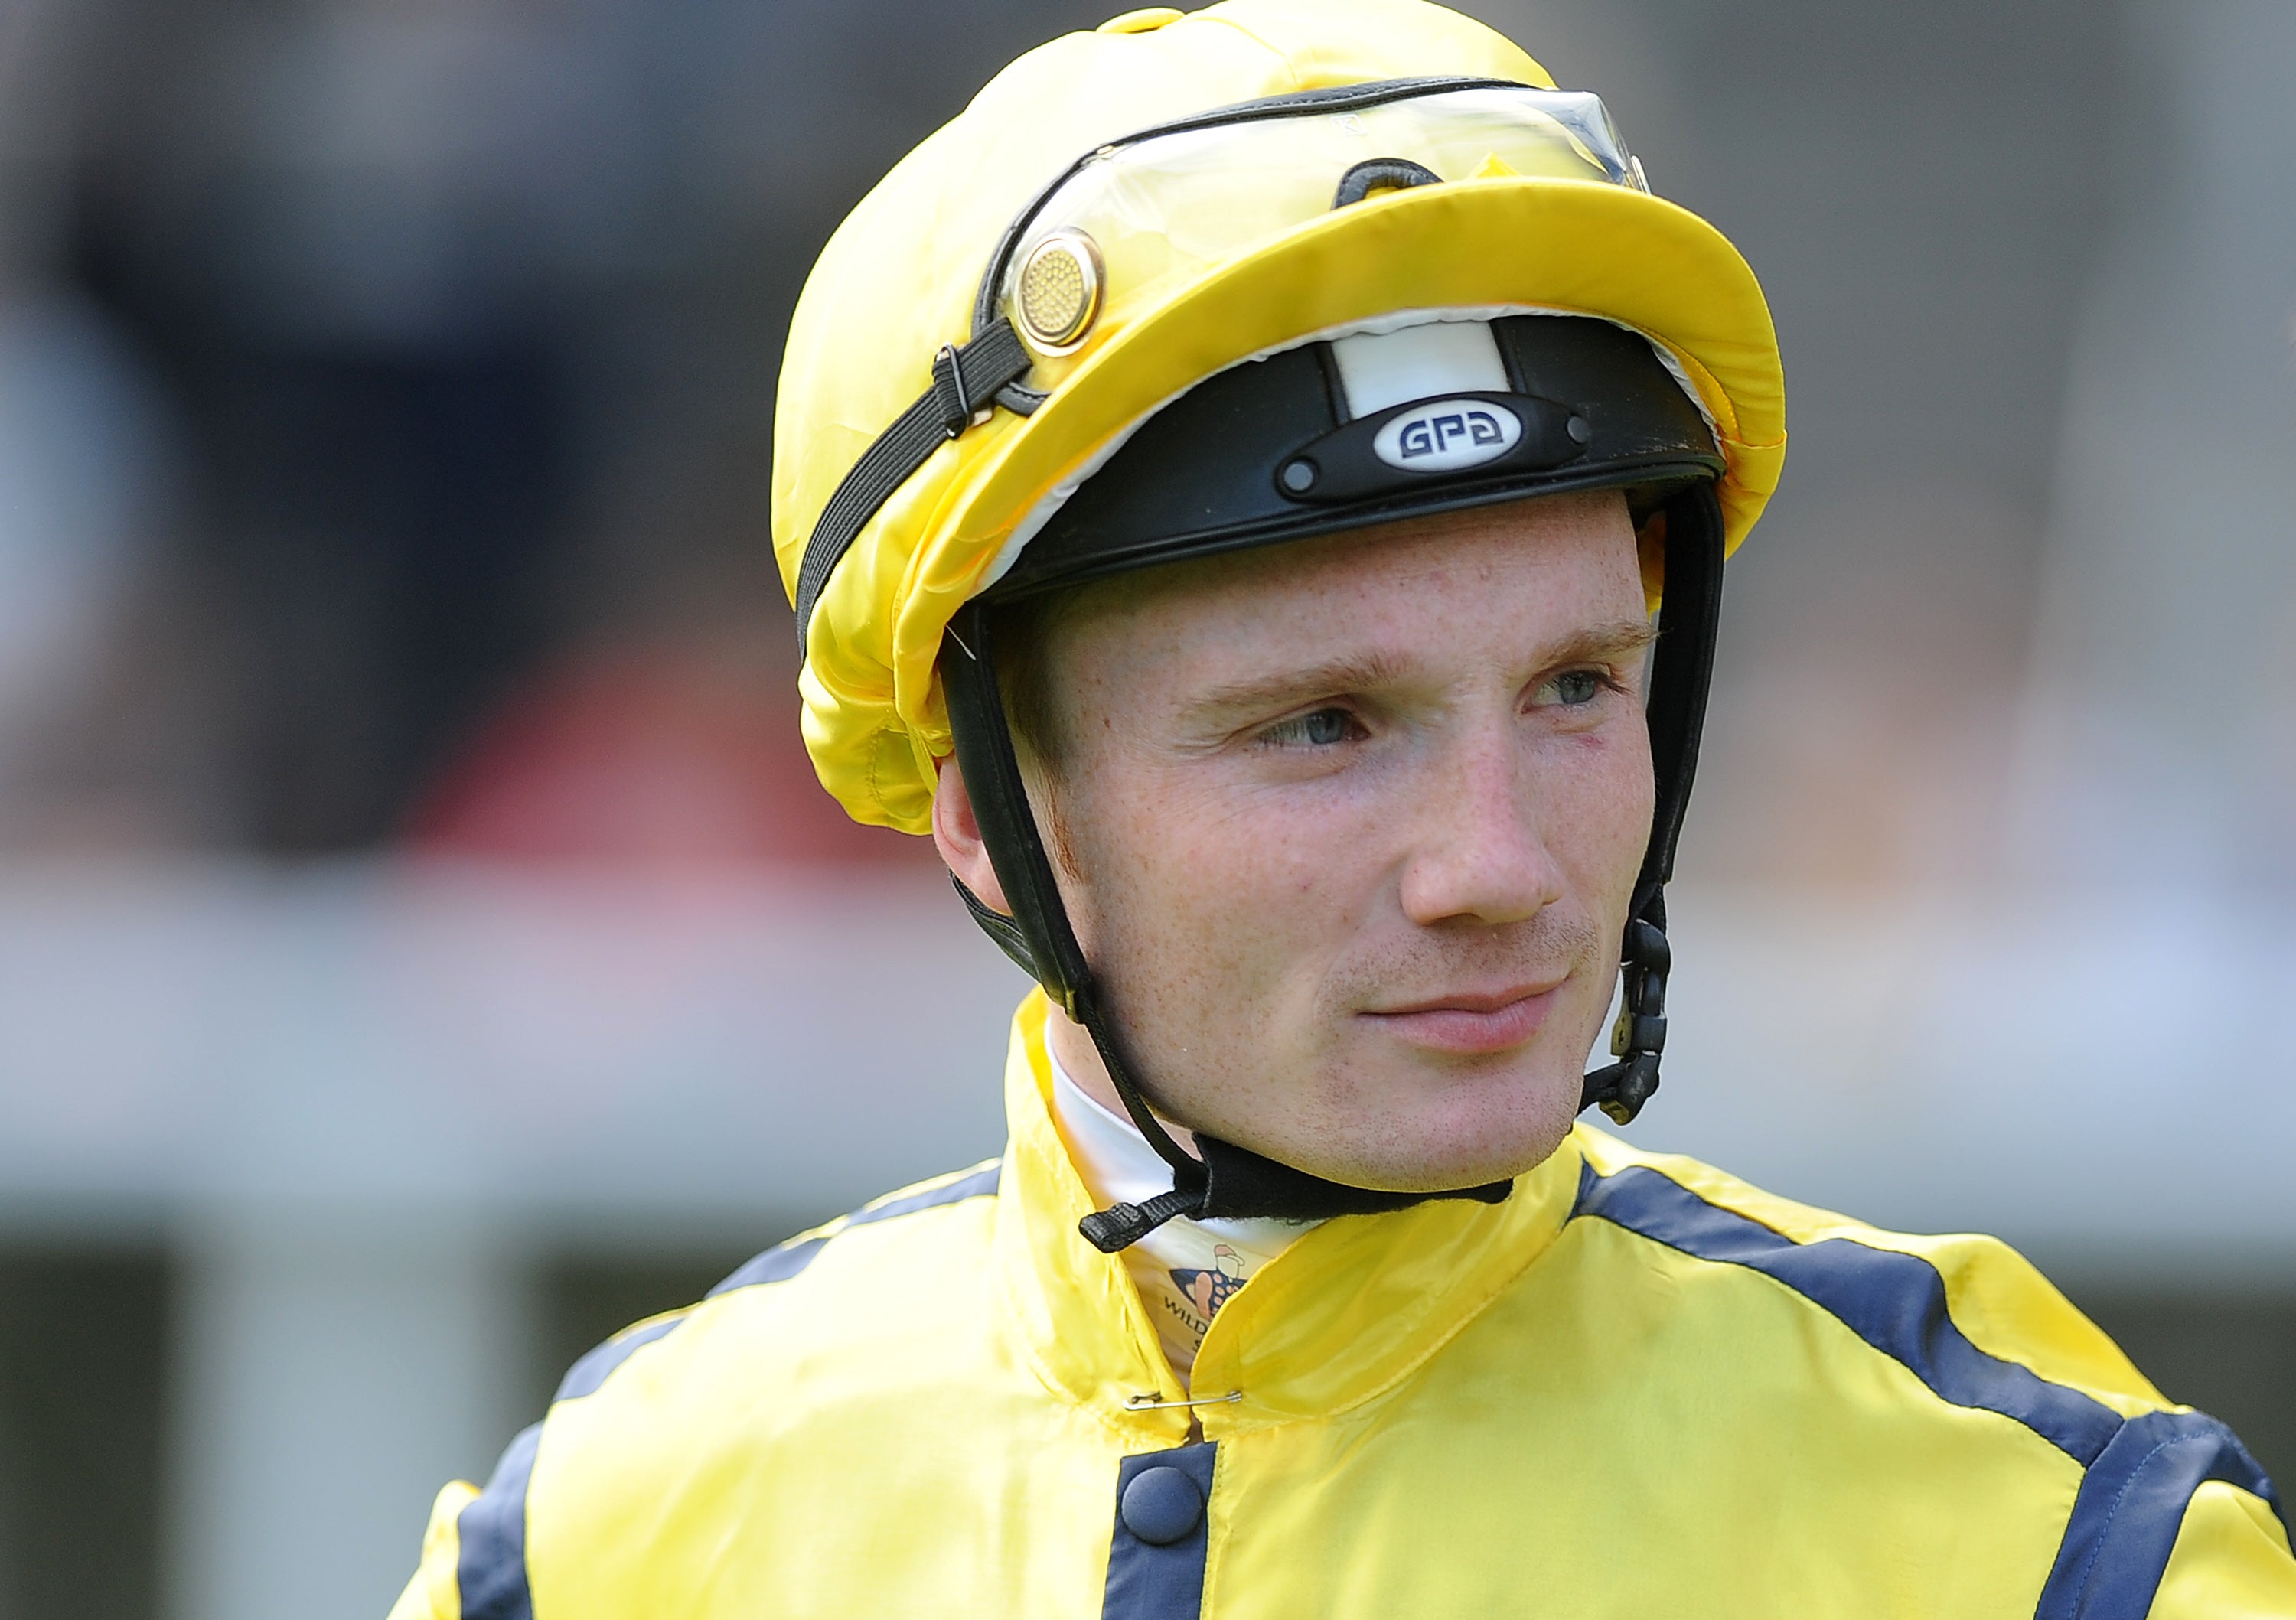 Frederik Tylicki suffered ‘life-changing’ injuries in the fall